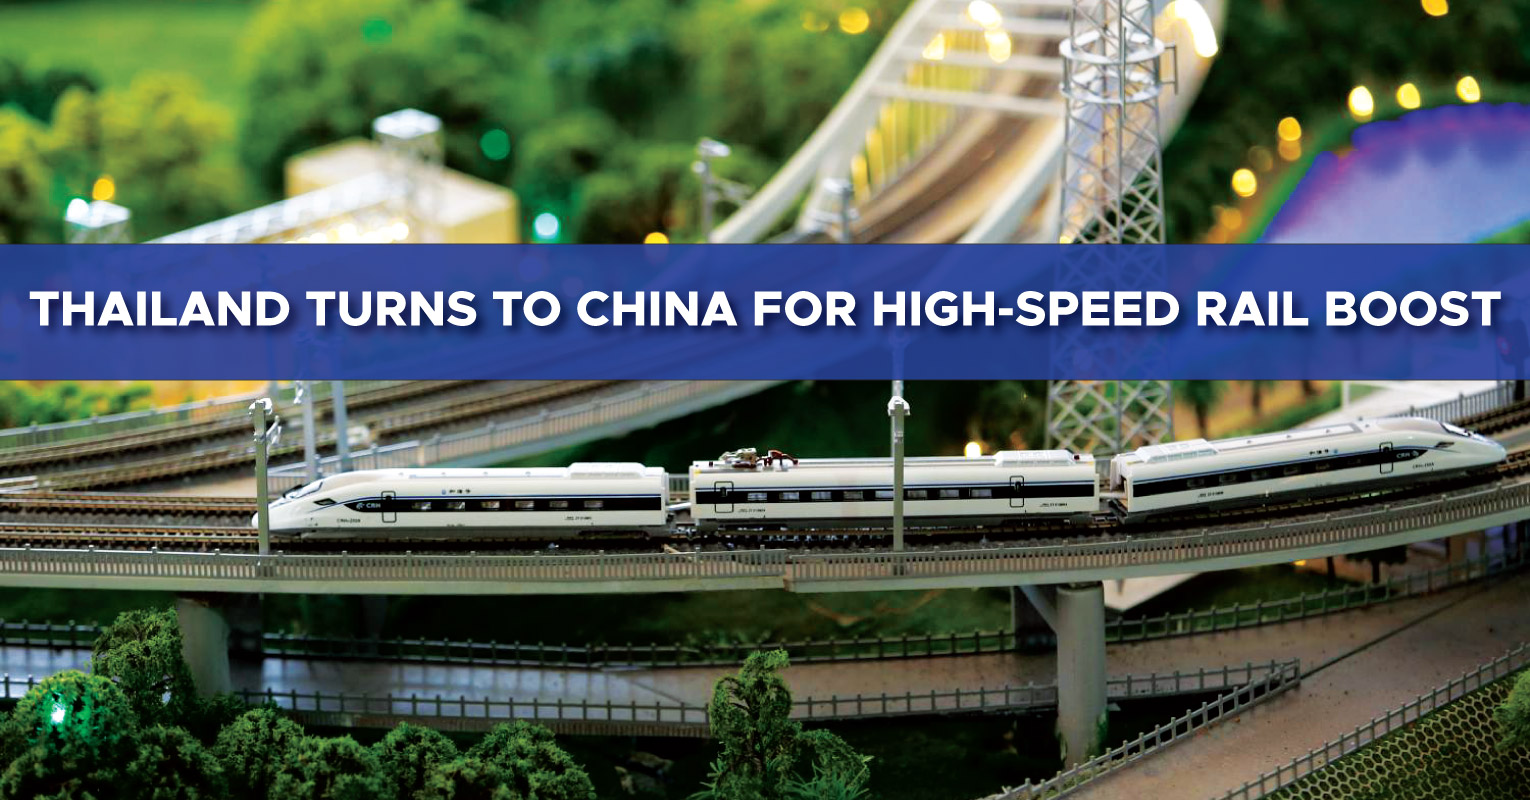 Thailand turns to China for high-speed rail boost